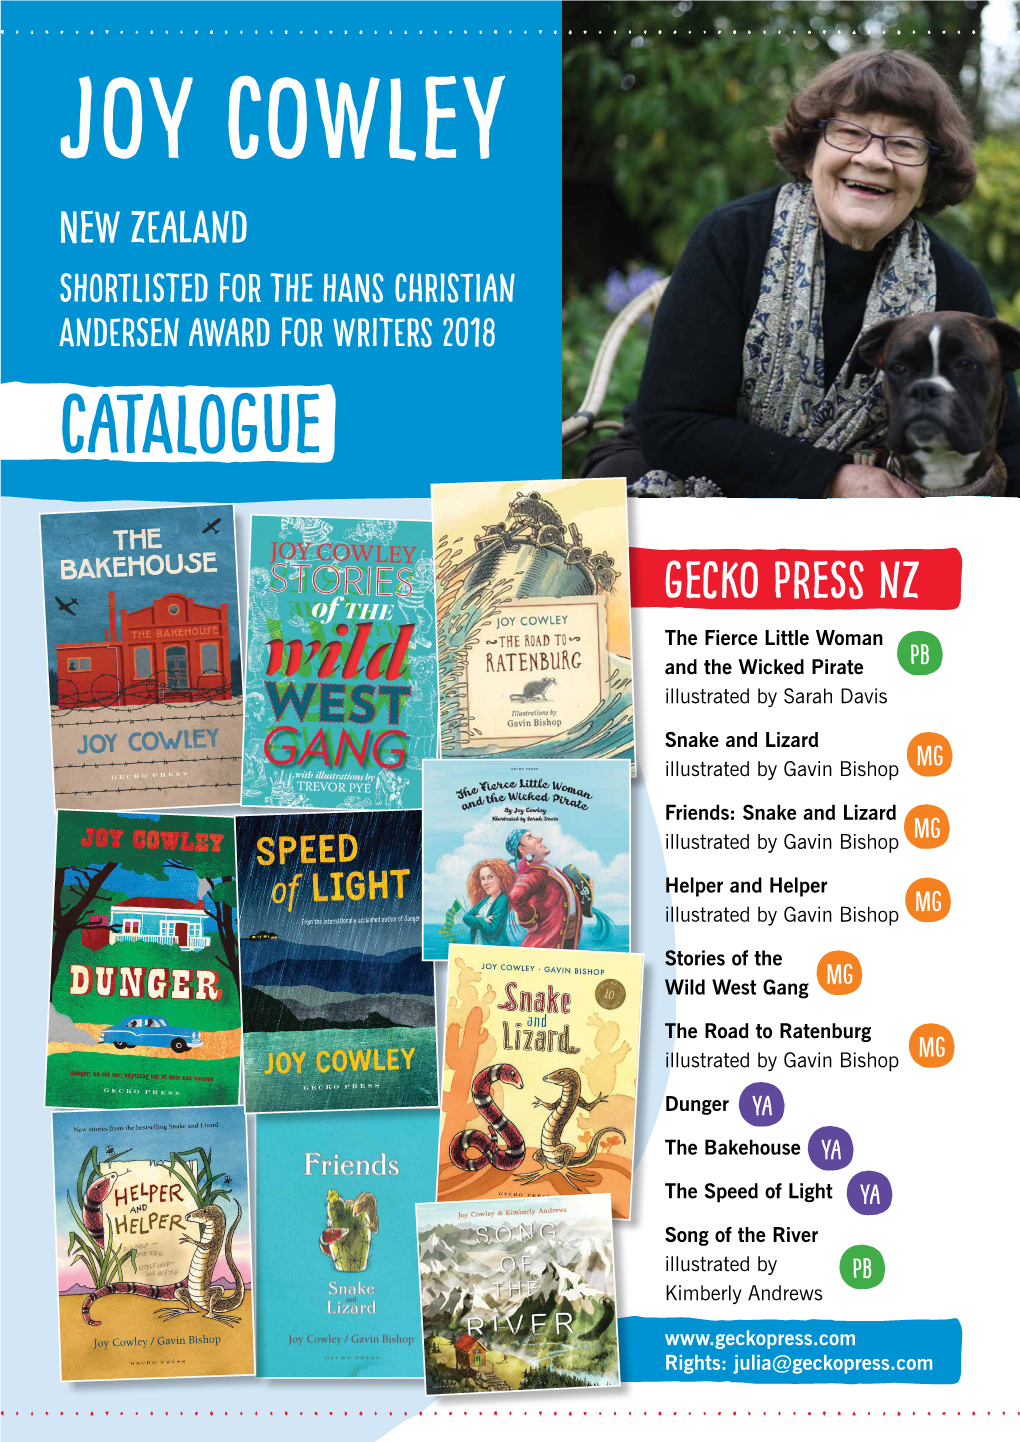 JOY COWLEY New Zealand Shortlisted for the Hans Christian Andersen Award for Writers 2018 Catalogue